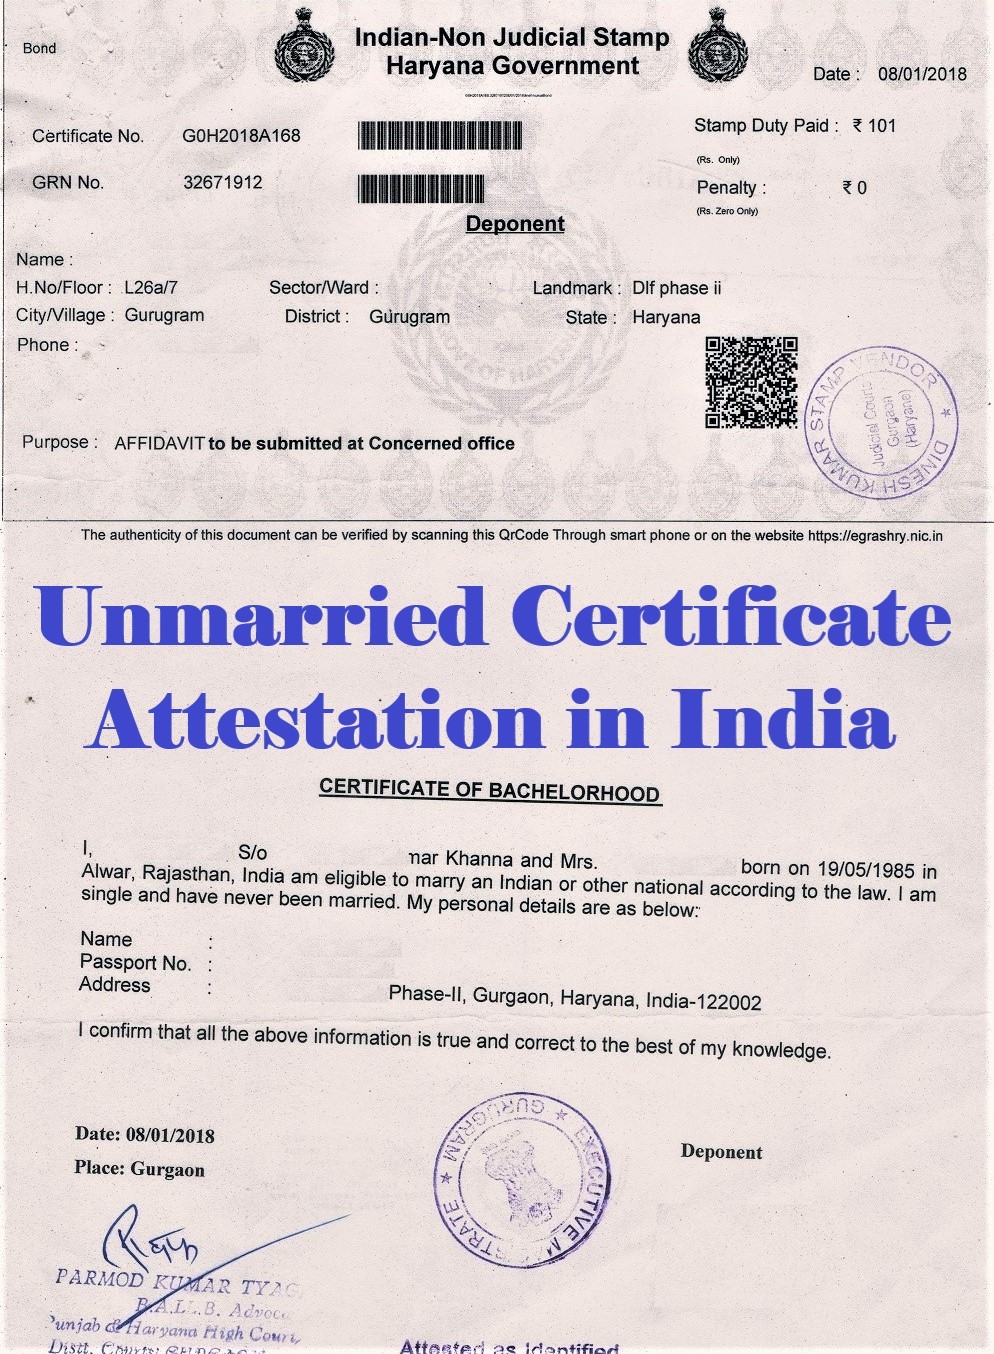 Unmarried Certificate Attestation from Eritrea Embassy